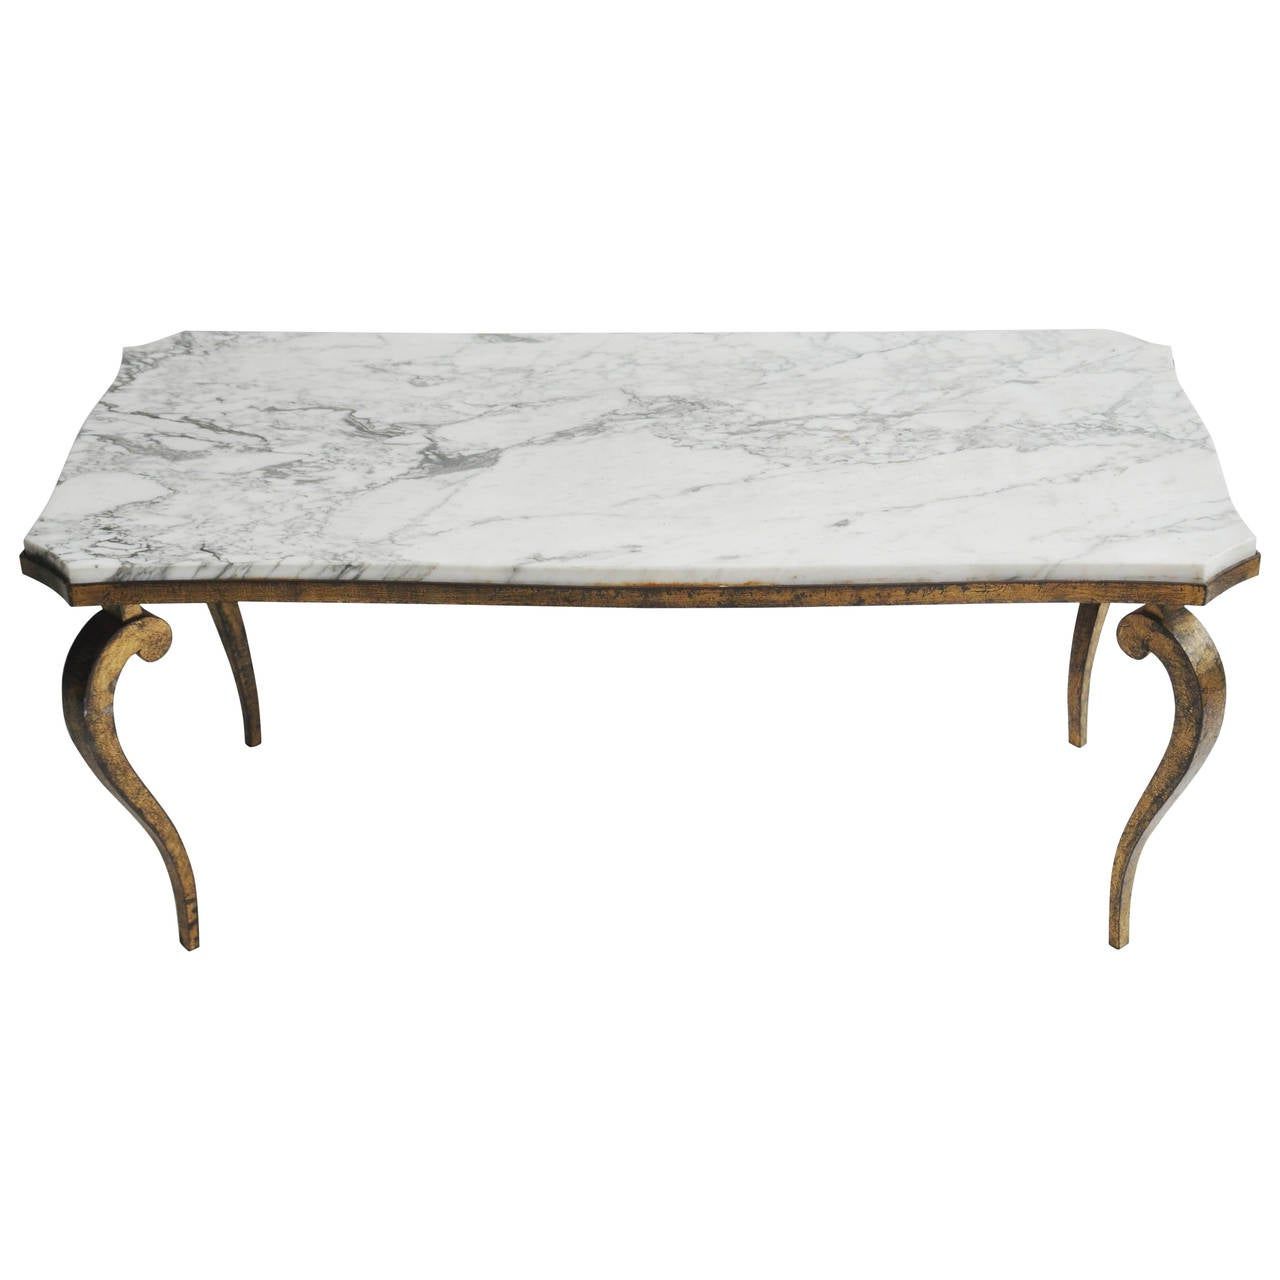 Marble And Gold Leaf Cabriole Leg Coffee Tableramsay With Best And Newest Antiqued Gold Leaf Coffee Tables (View 8 of 20)